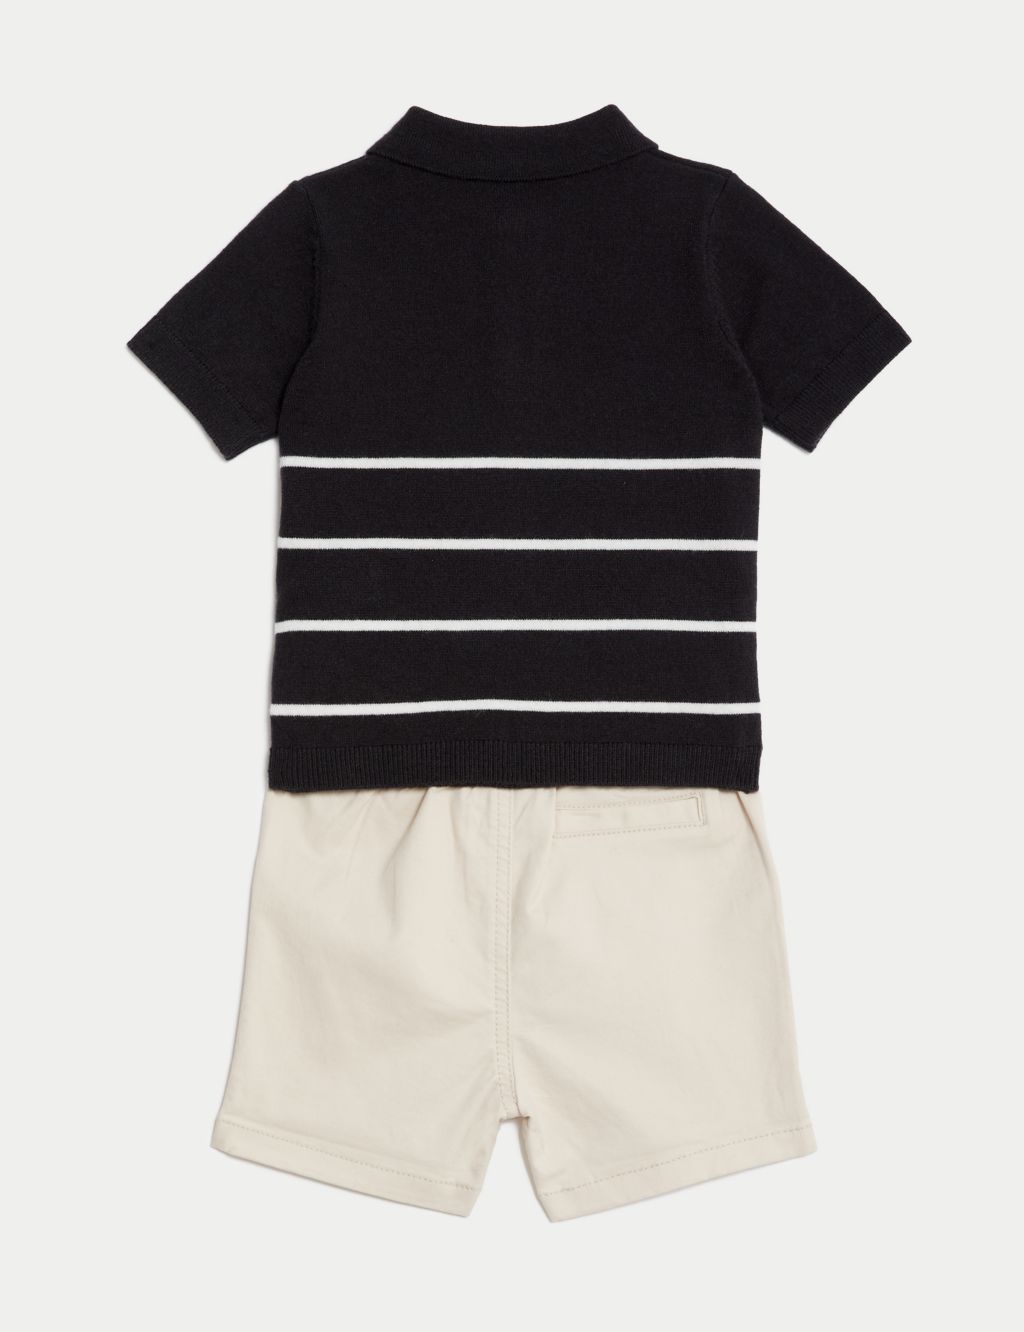 2pc Striped Outfit (0-3 Yrs) image 2